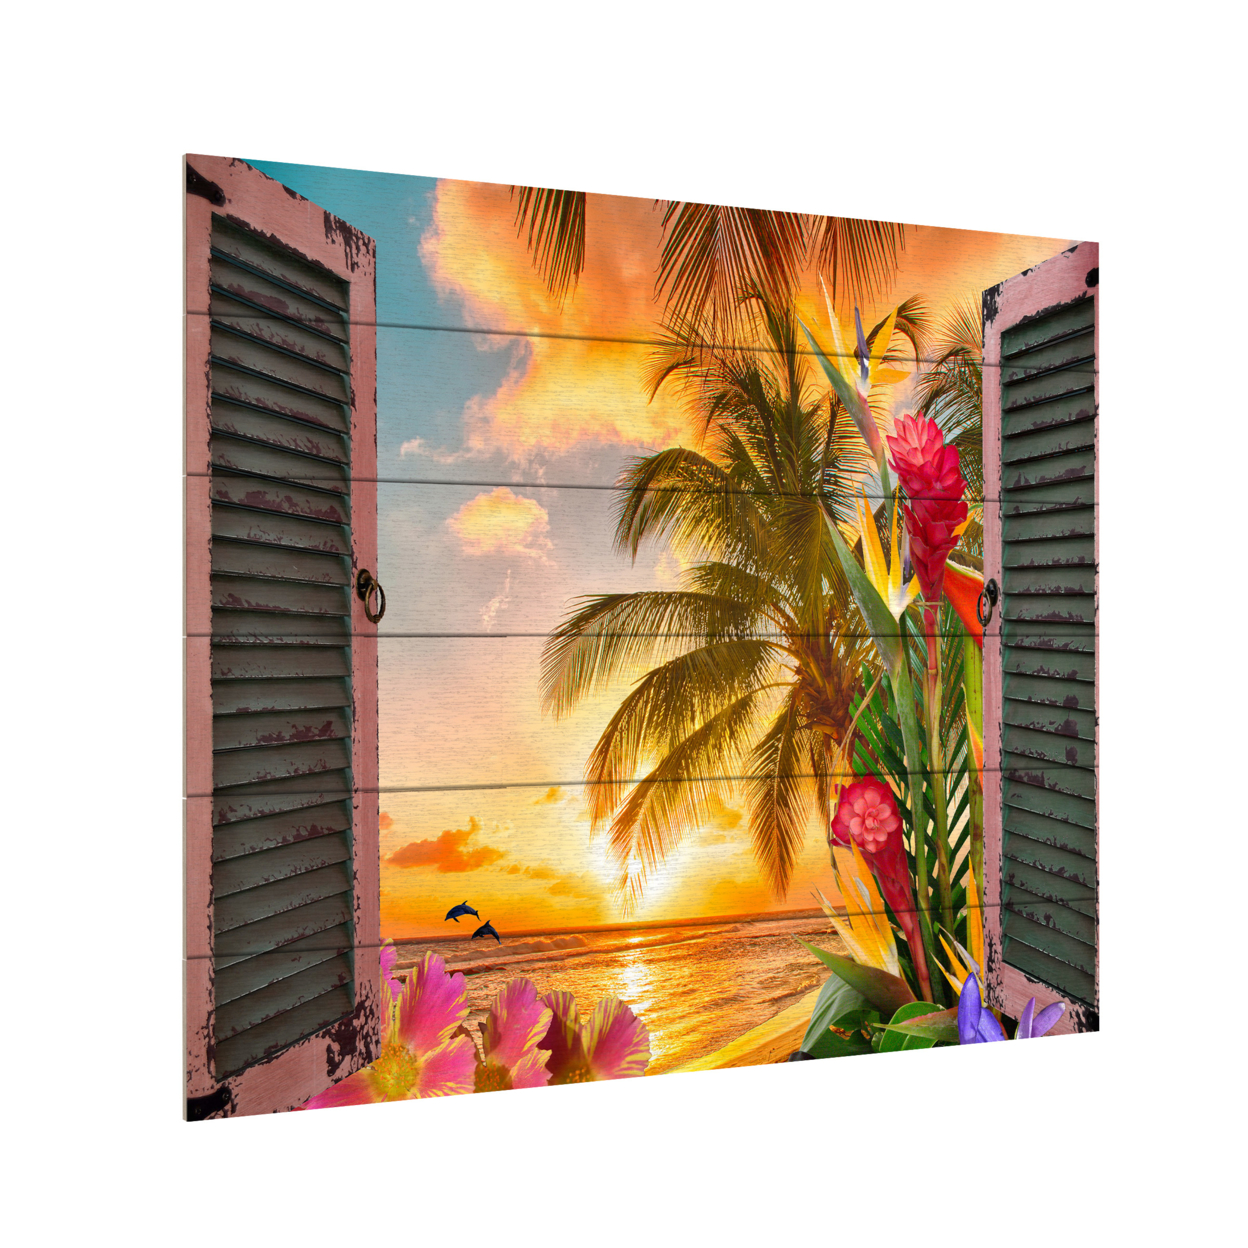 Wooden Slat Art 18 X 22 Inches Titled Window To Paradise II Ready To Hang Home Decor Picture